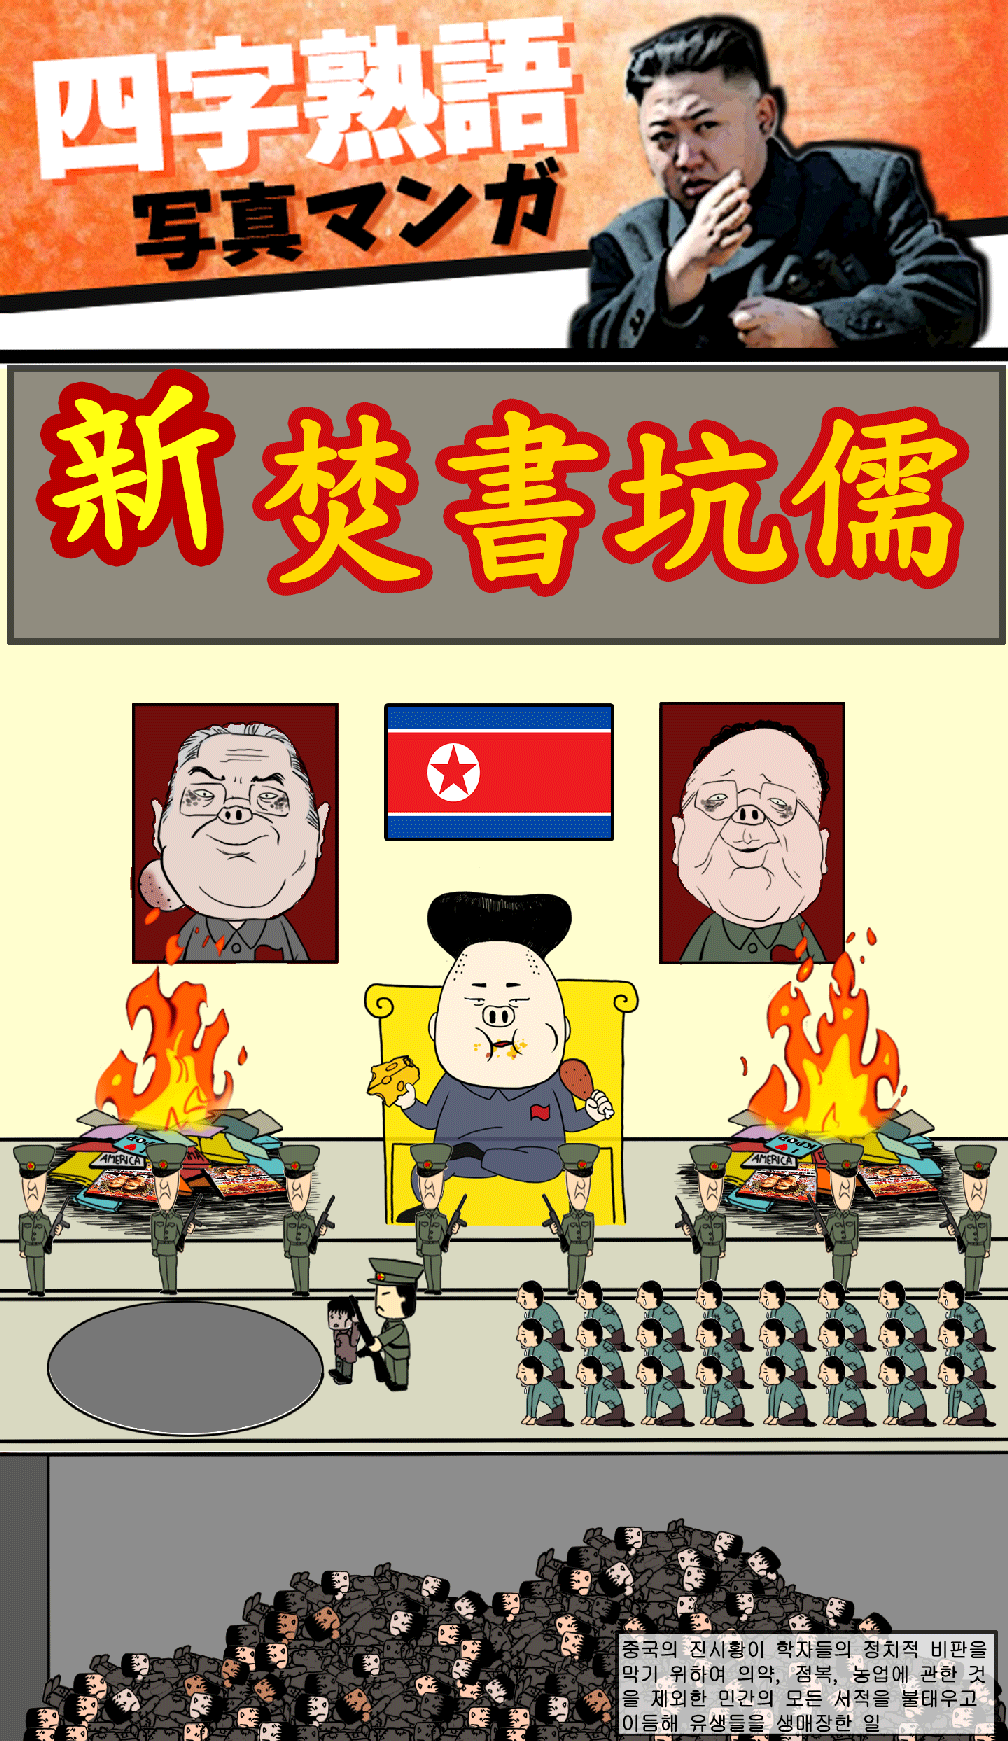 Burning books on the Western classics and burying  pro-democratic scholars alive to strengthen the power of Kim Jong-un in NK